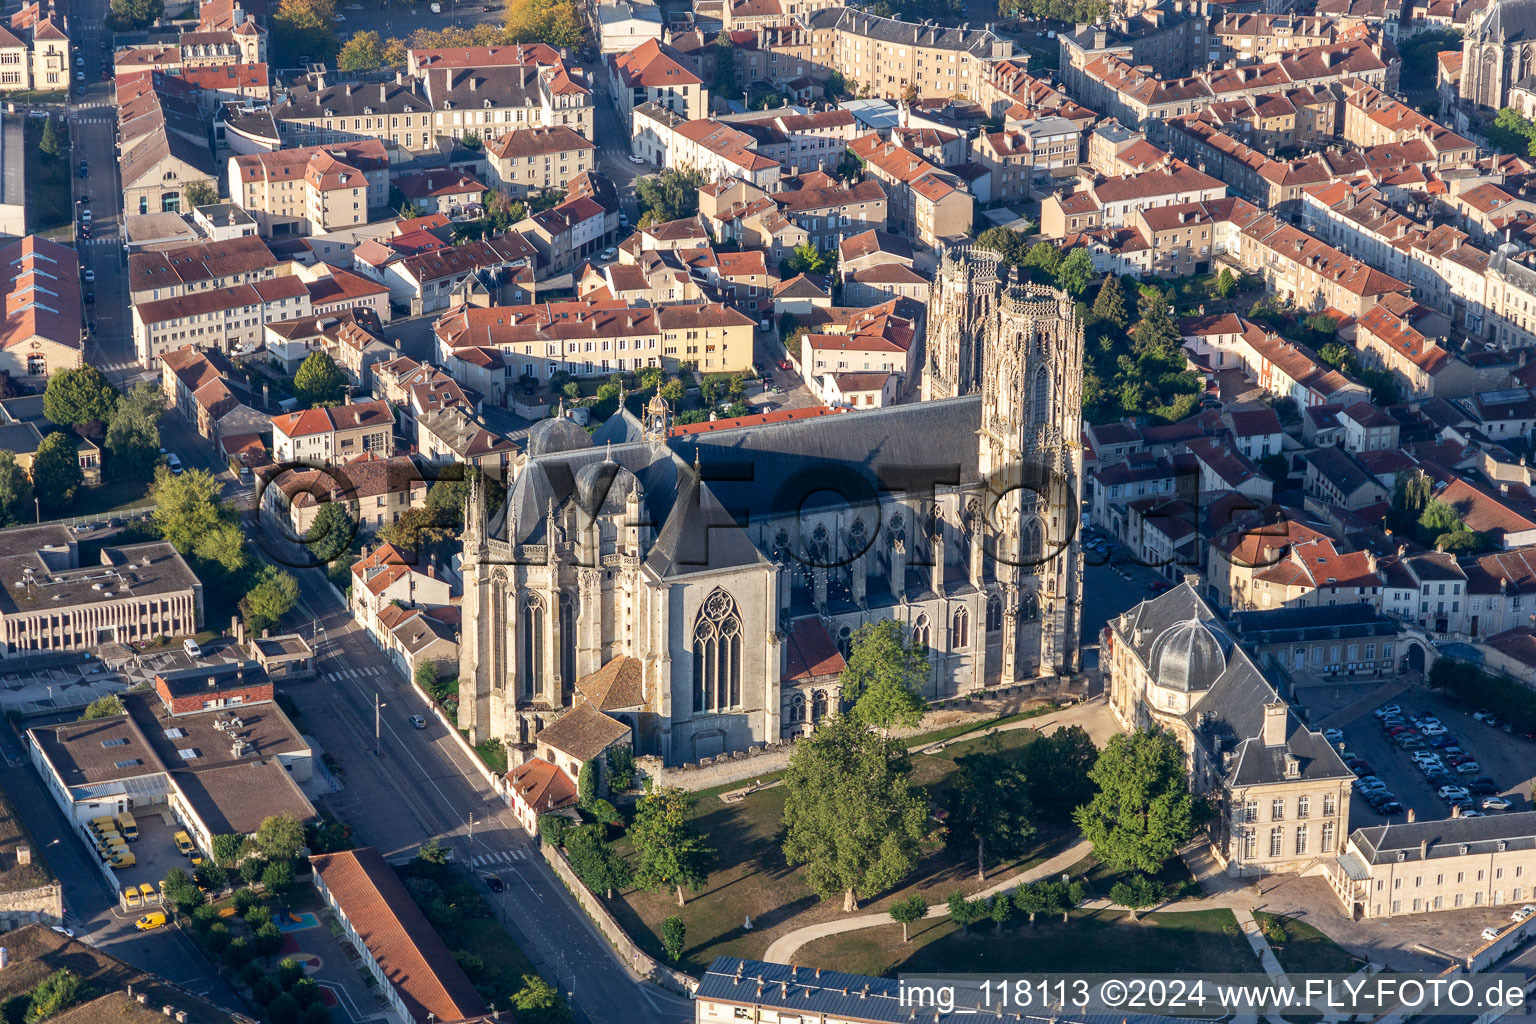 Aerial view of Church building of the cathedral of St. Stephen's in Toul in Grand Est, France